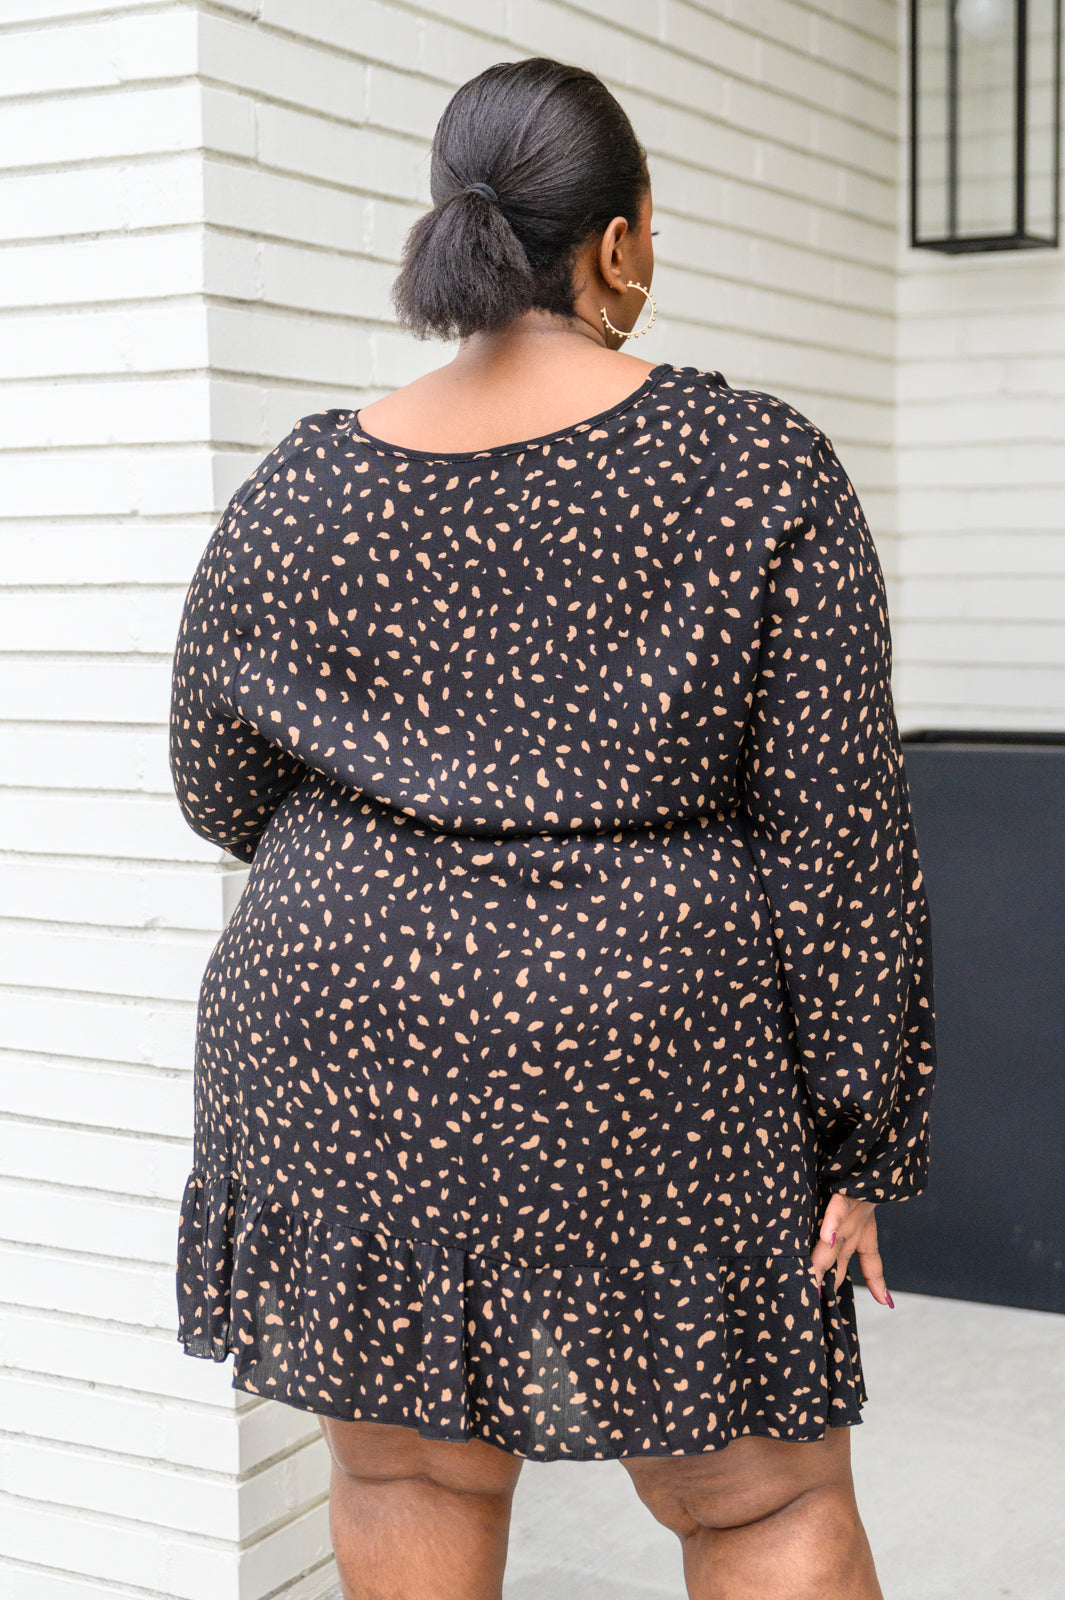 Make Your Happiness Long Sleeve Dress in Black - The GlamBox Jewels Boutique